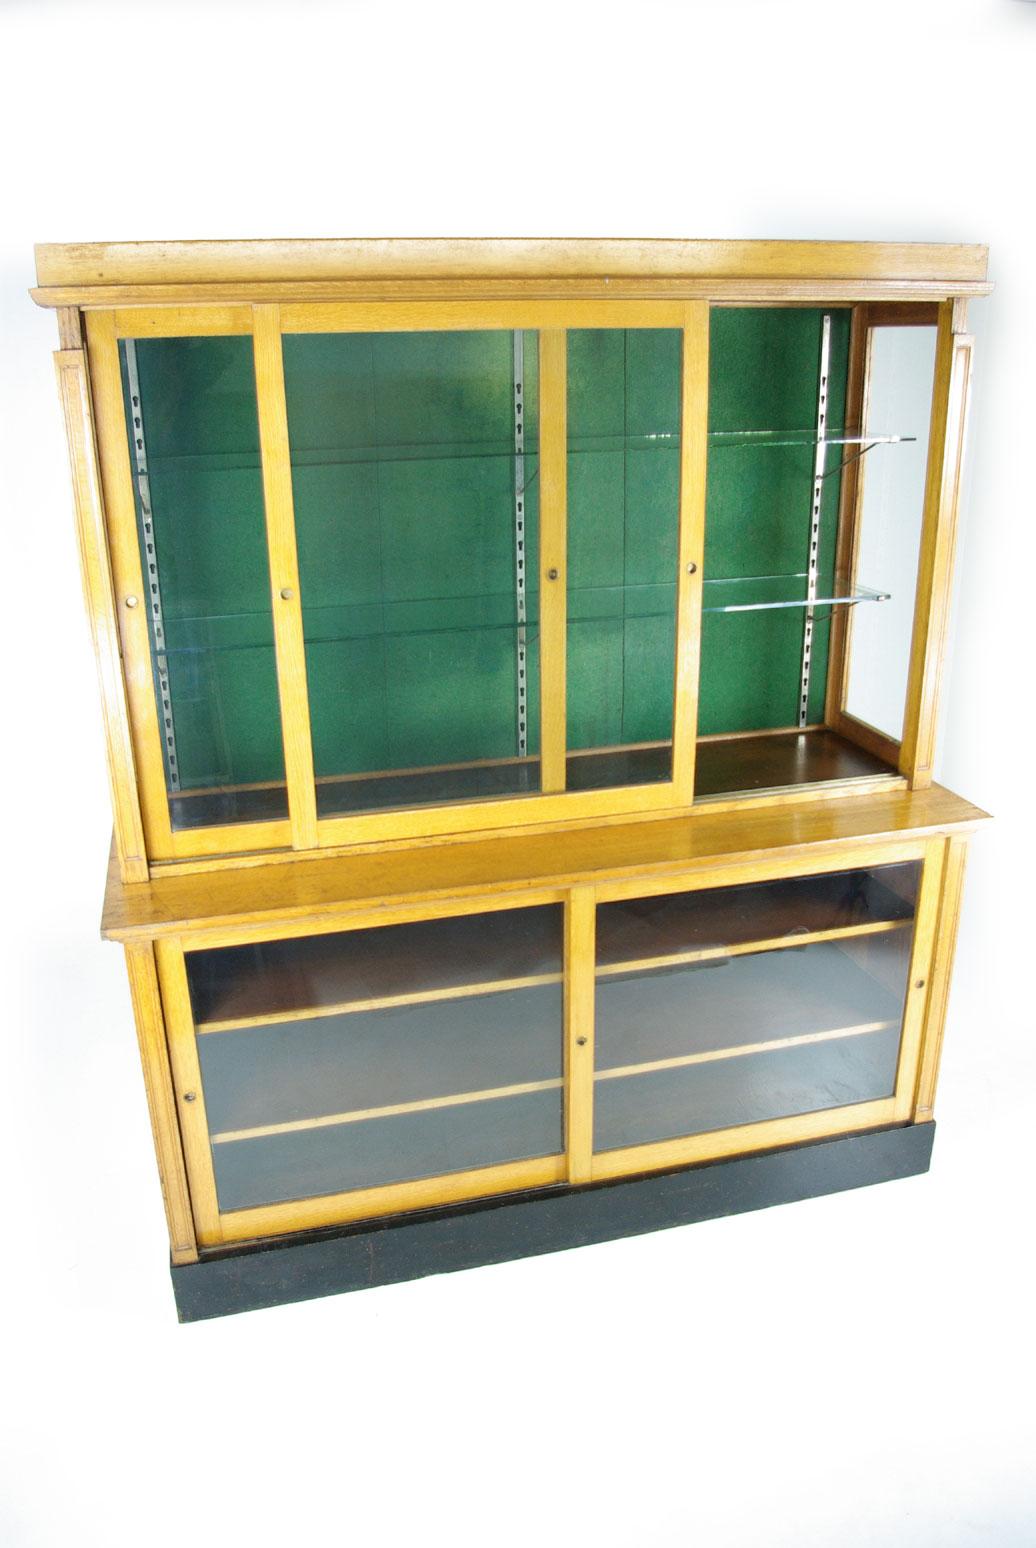 Large oak showcase, country store showcase, China display cabinet, Canada, 1920, Antique Furniture, B398.

Canada, 1920
Solid light oak construction
All original finish
Two sliding glass doors above with plate glass shelves (adjustable).
Two sliding